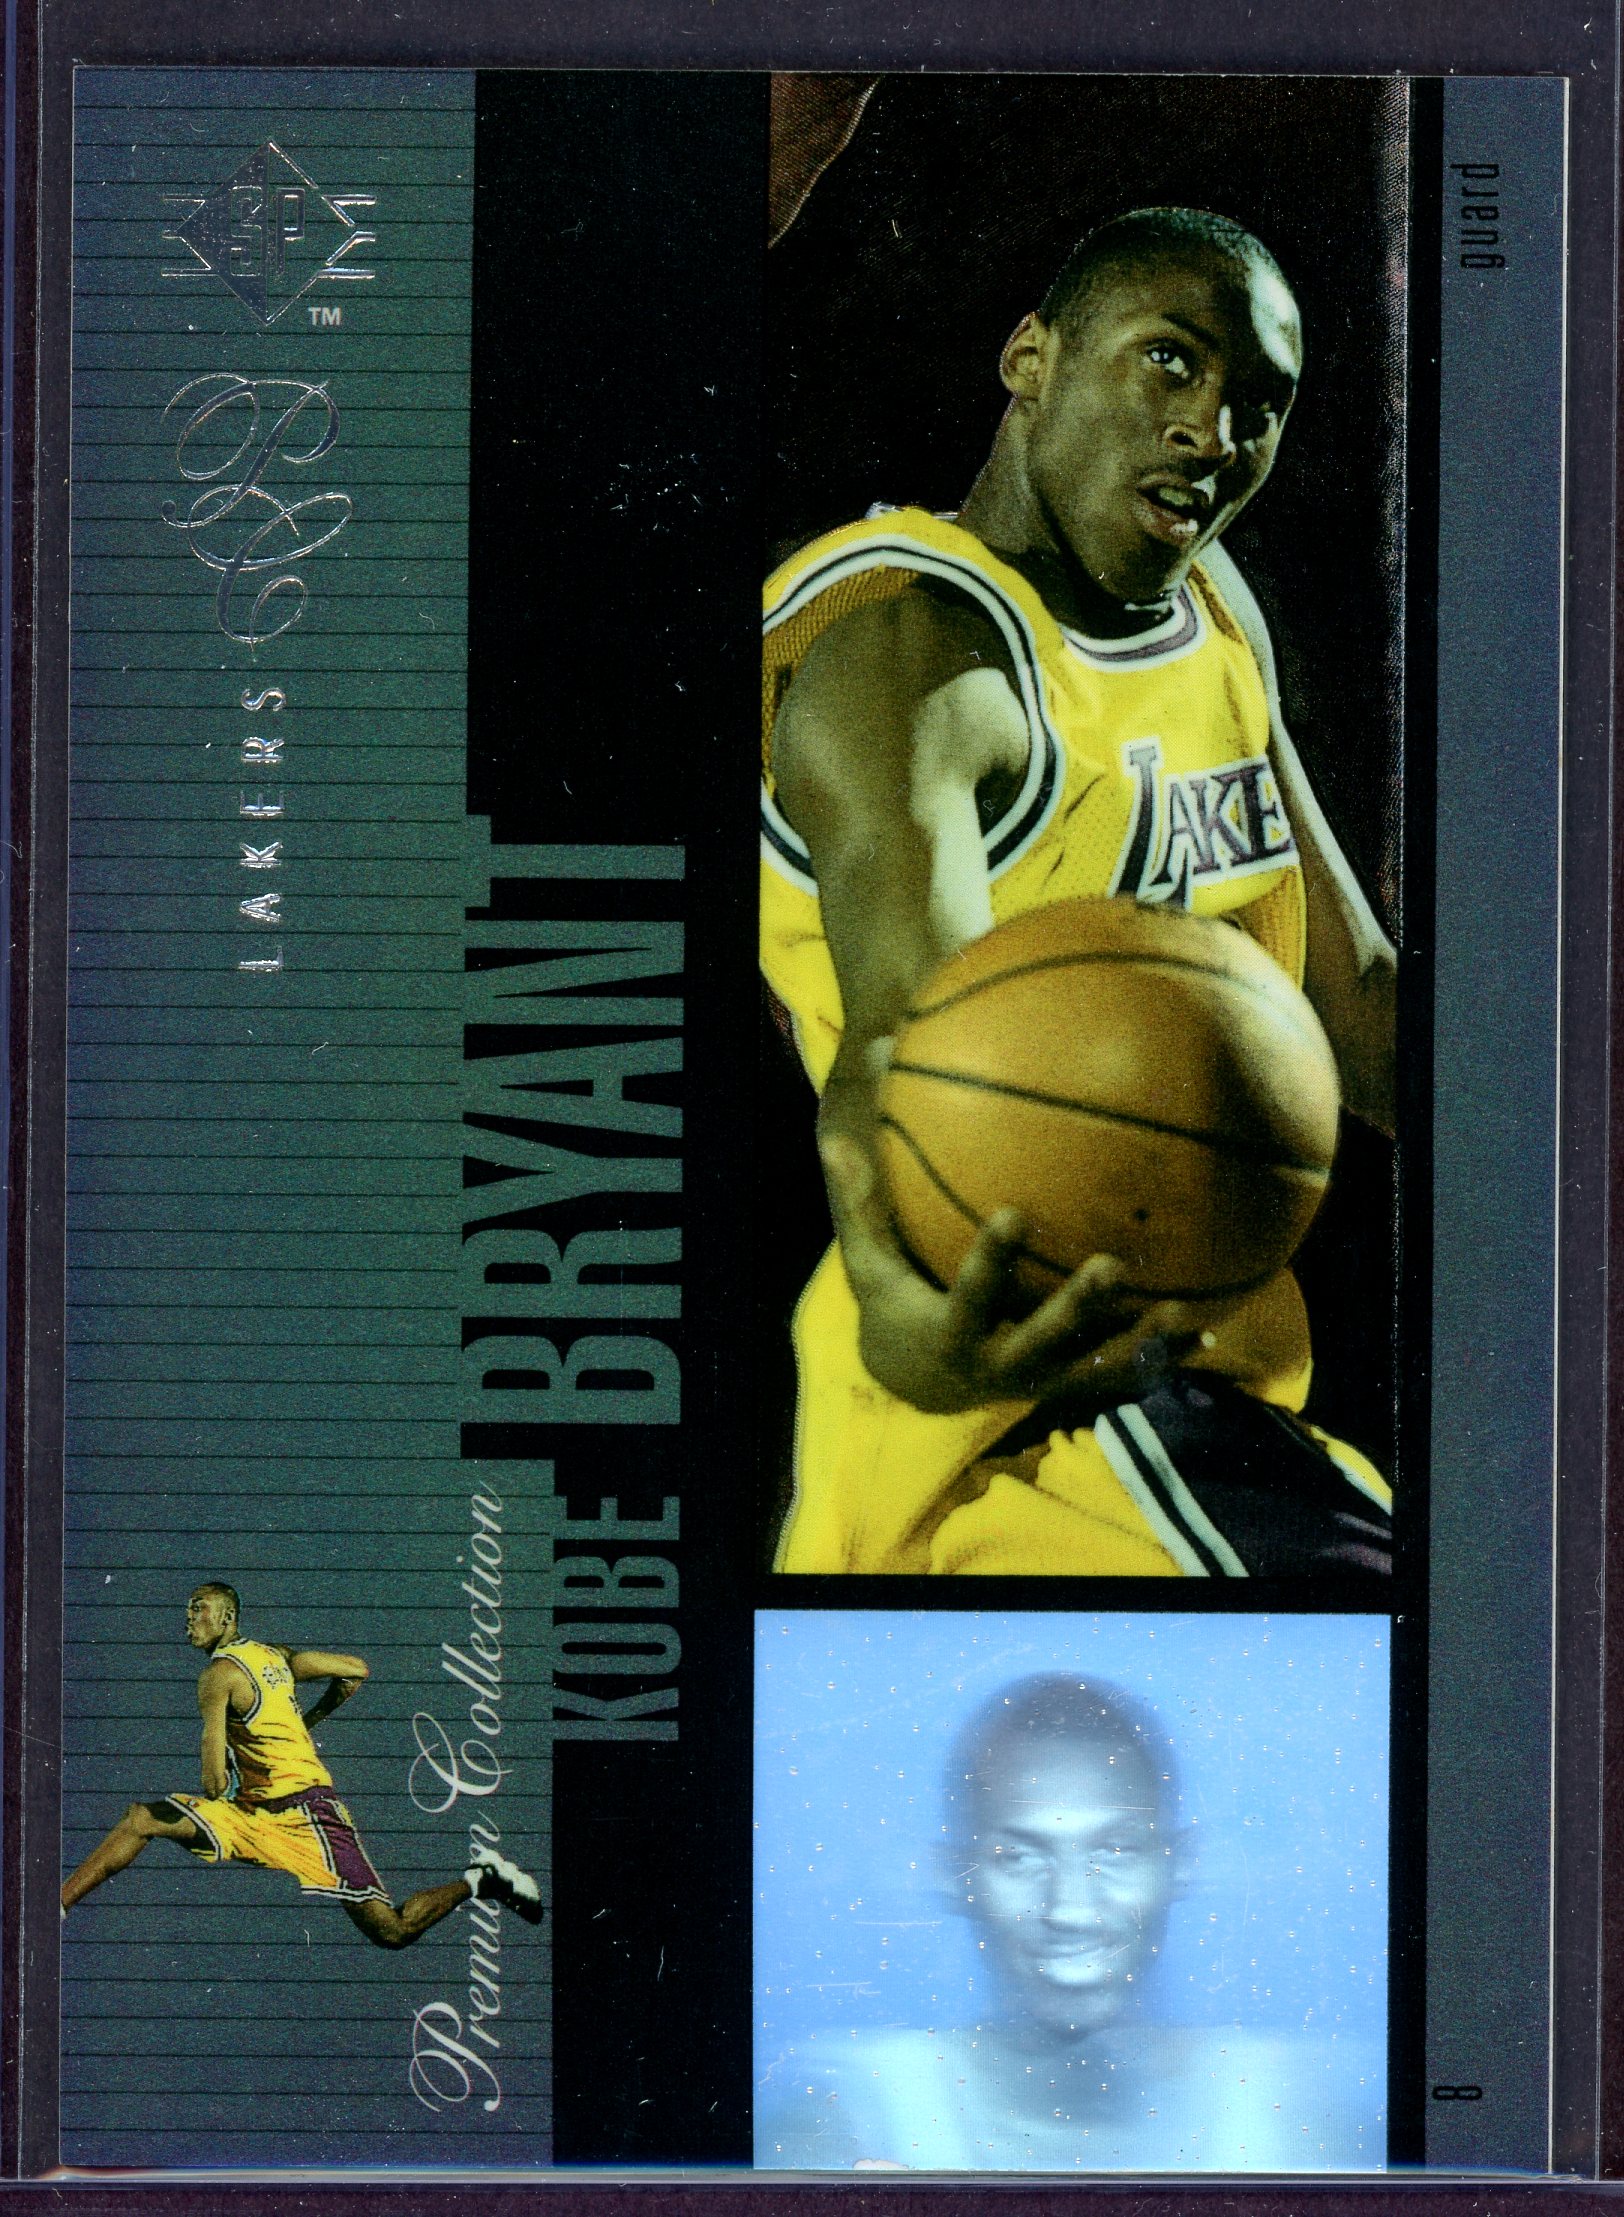 Upper Deck Kobe Bryant MVP Card - Send to PSA Beckett BGS for a 9 or 10 GEM  MINT grade - Lakers Jersey 8 NBA Collectibles - $39 OBO for Sale in  Carlsbad, CA - OfferUp